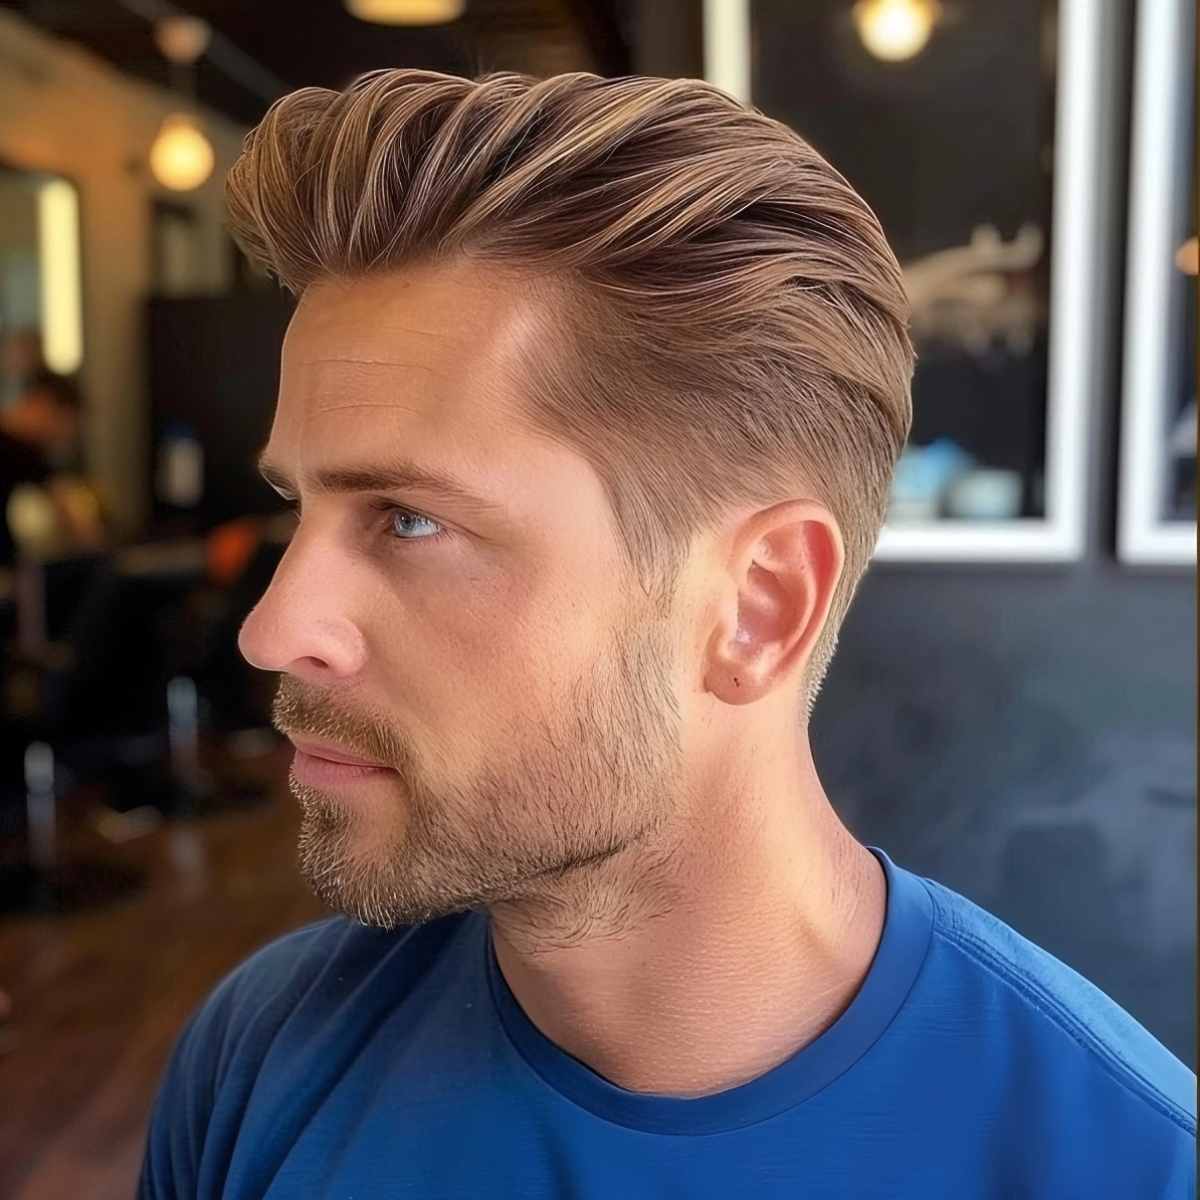 Natural Taper Cut hairstyle for men with medium-length hair